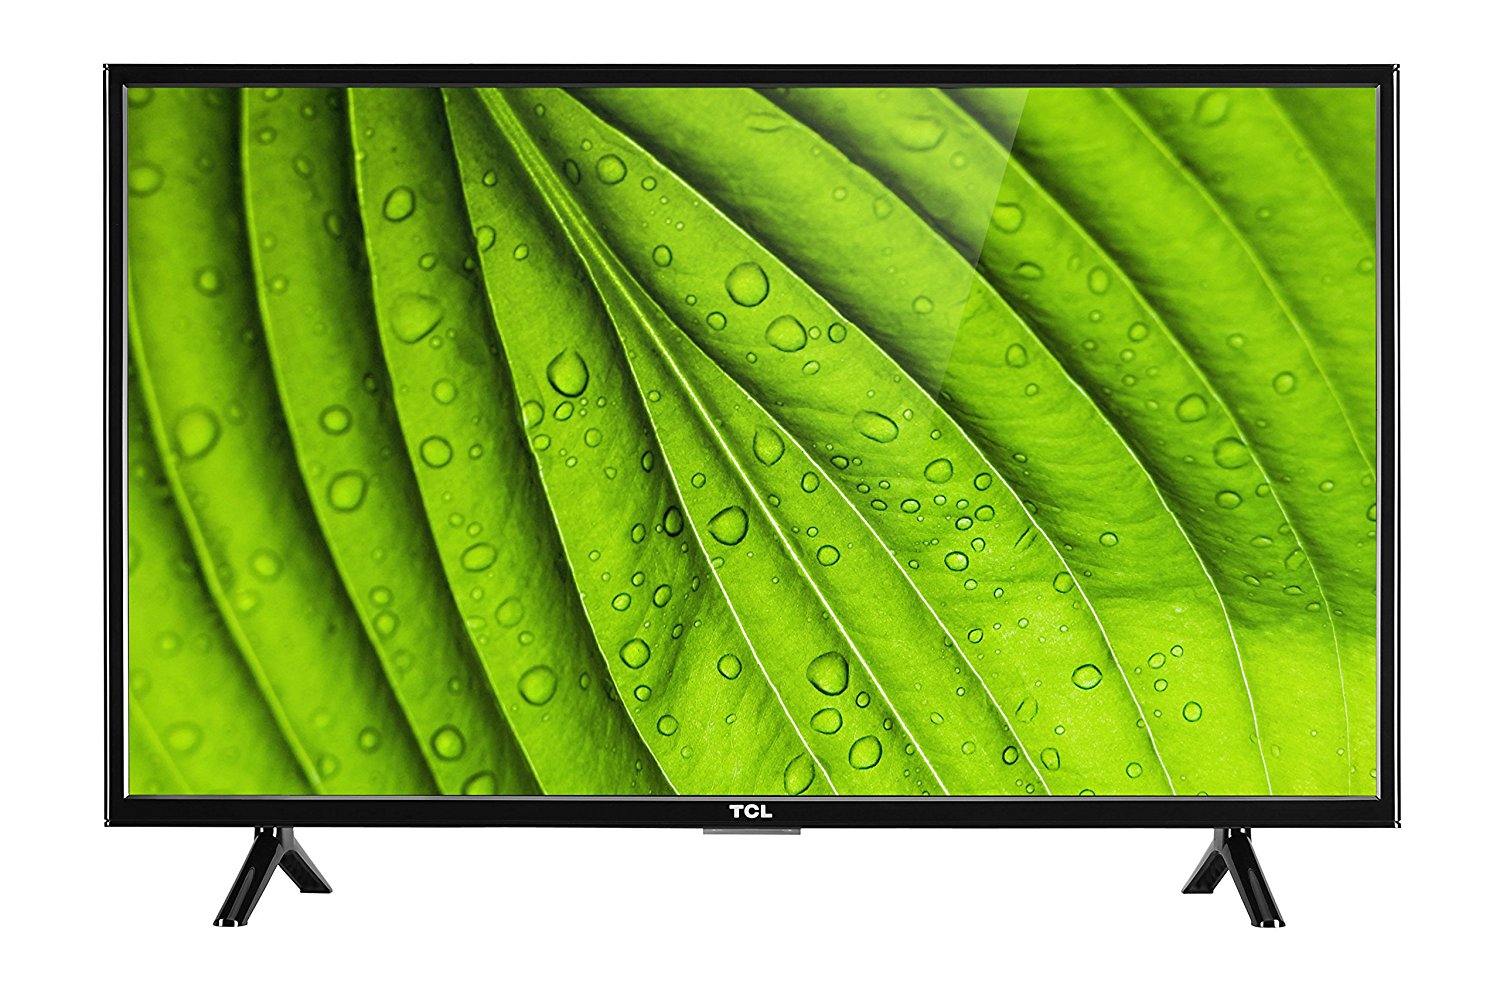 An image of TCL 40D100 40-Inch FHD LED TV | Your TV Set 